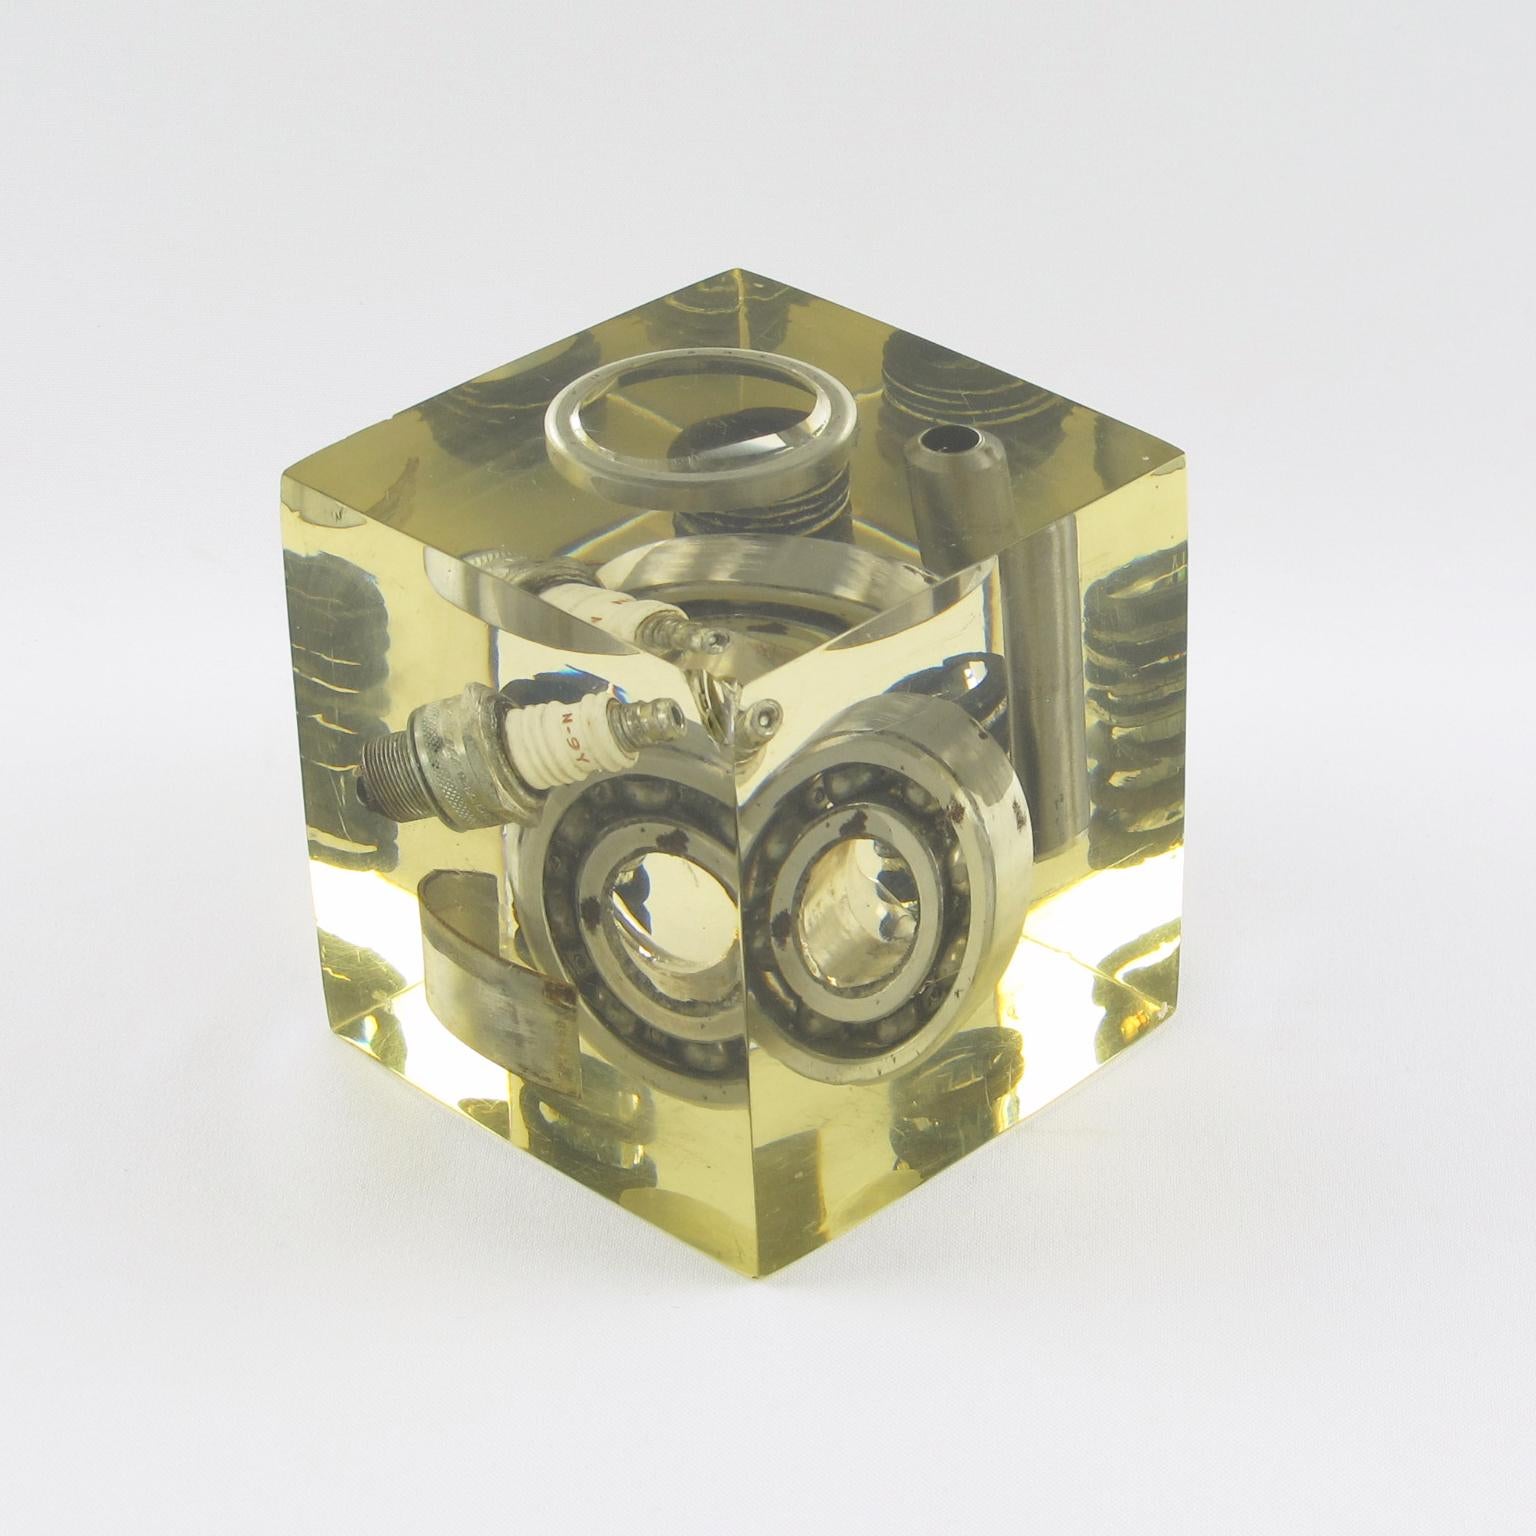 Mid-Century Modern Pierre Giraudon Resin Cube Sculpture Paperweight with Car Parts Inclusions 1970s